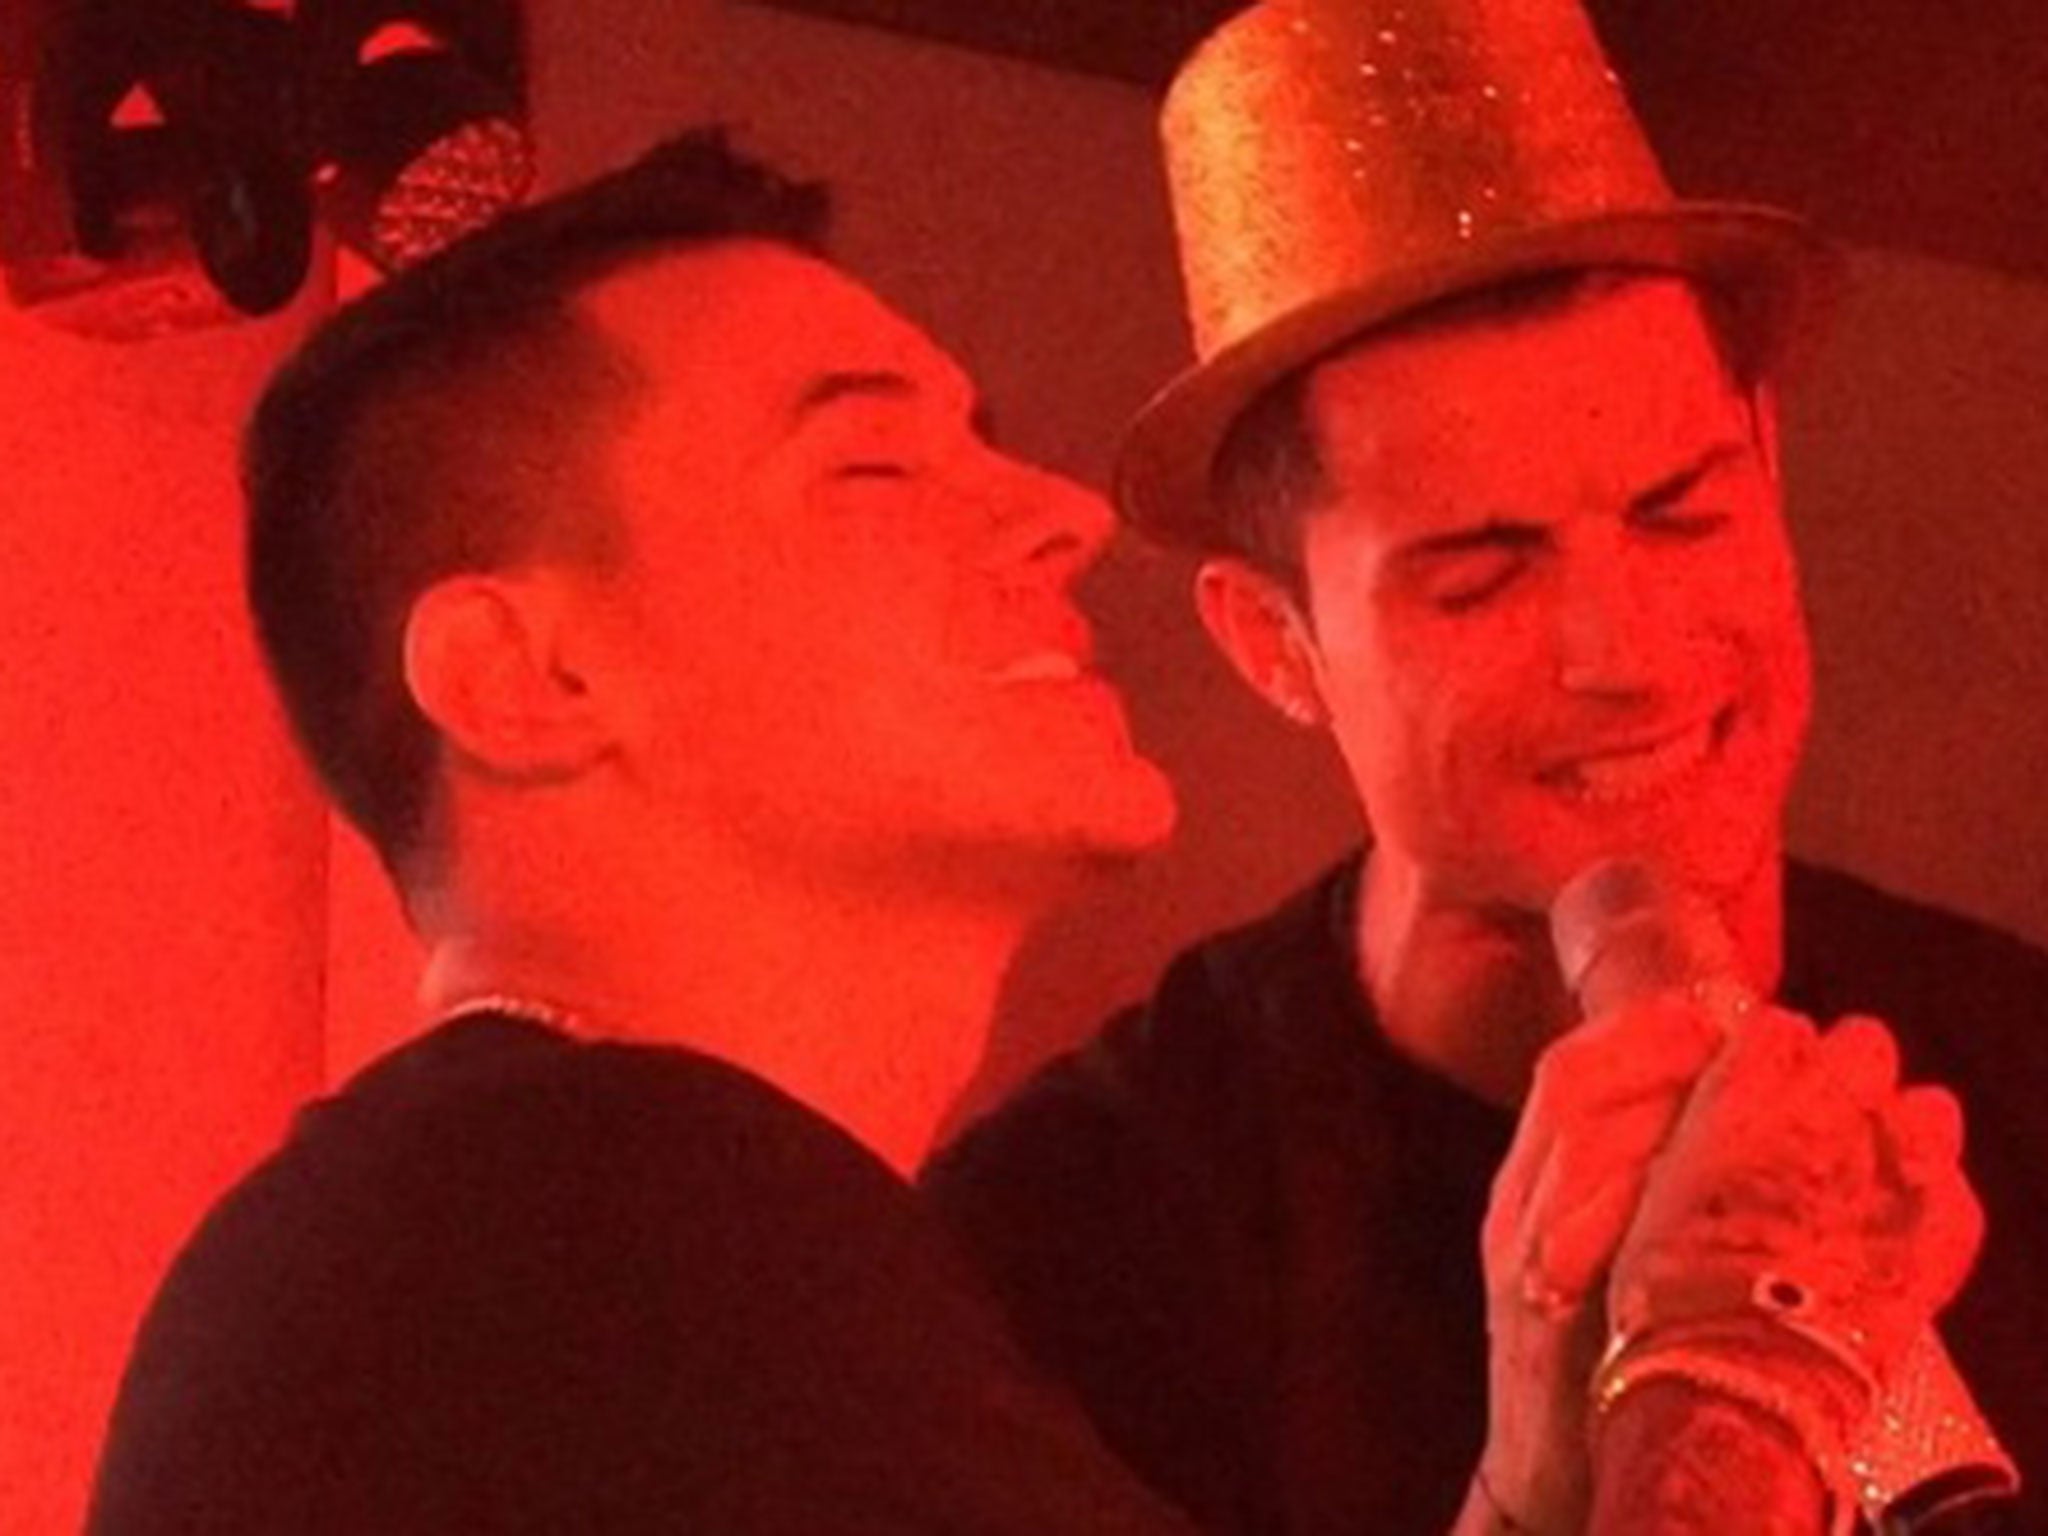 Kevin Roldan and Cristiano Ronaldo belting out a tune at Ronaldo's birthday party